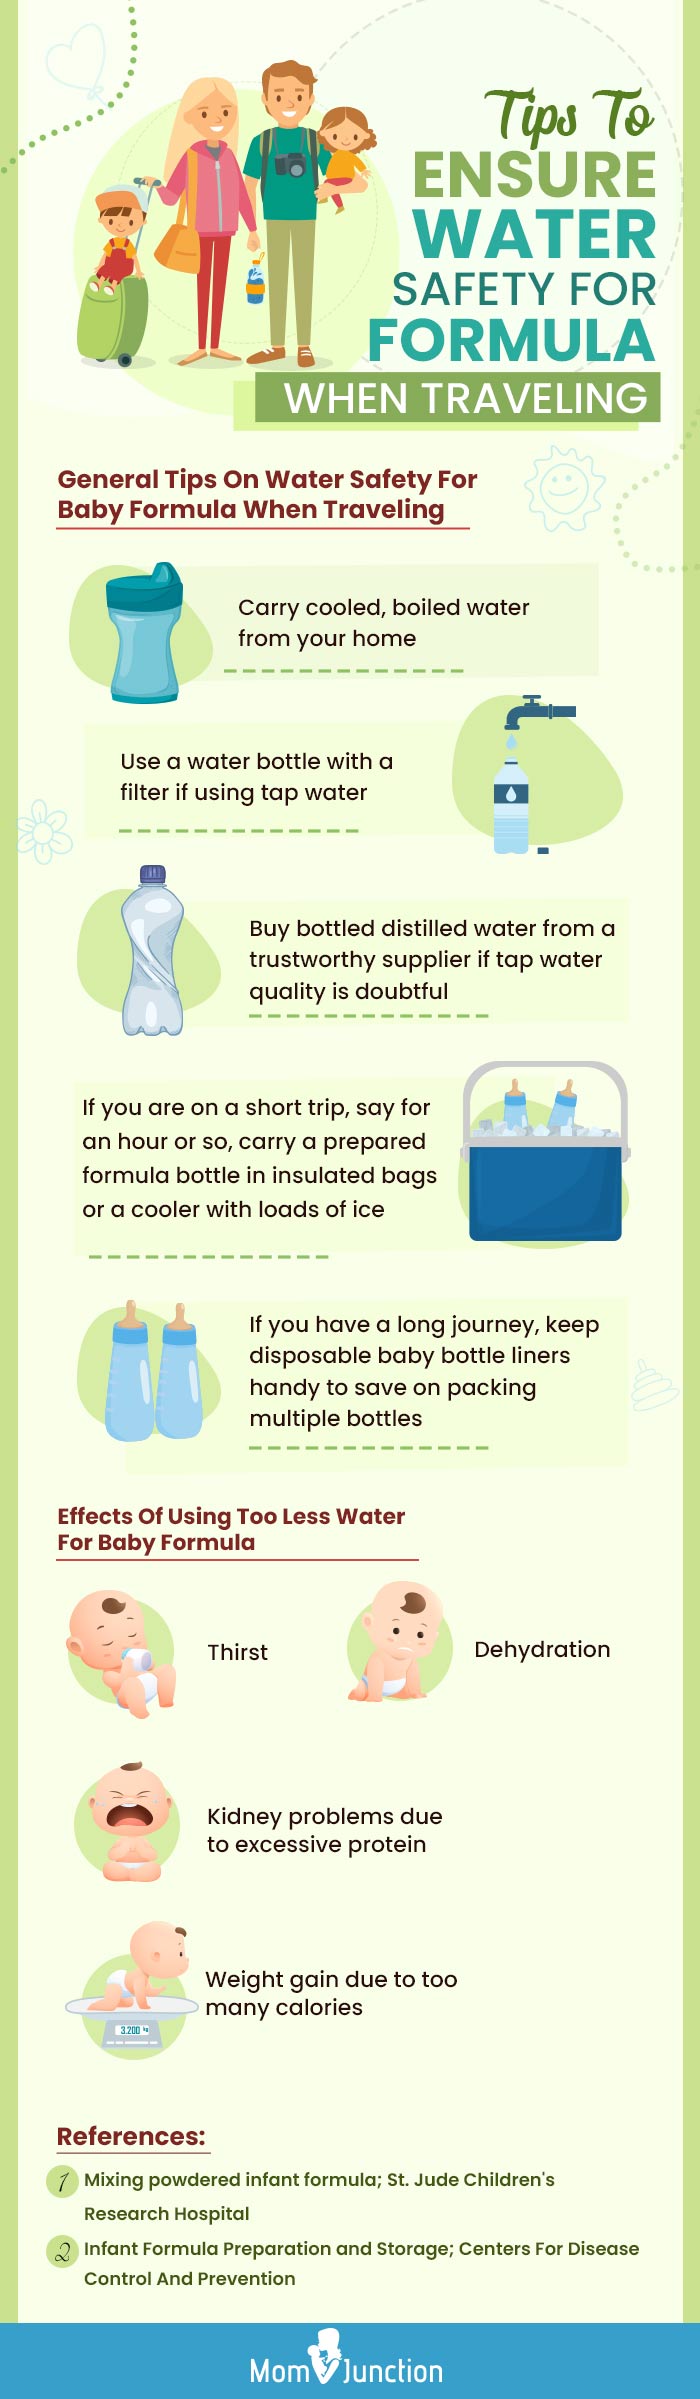 tips to ensure water safety for baby formula when traveling (infographic)